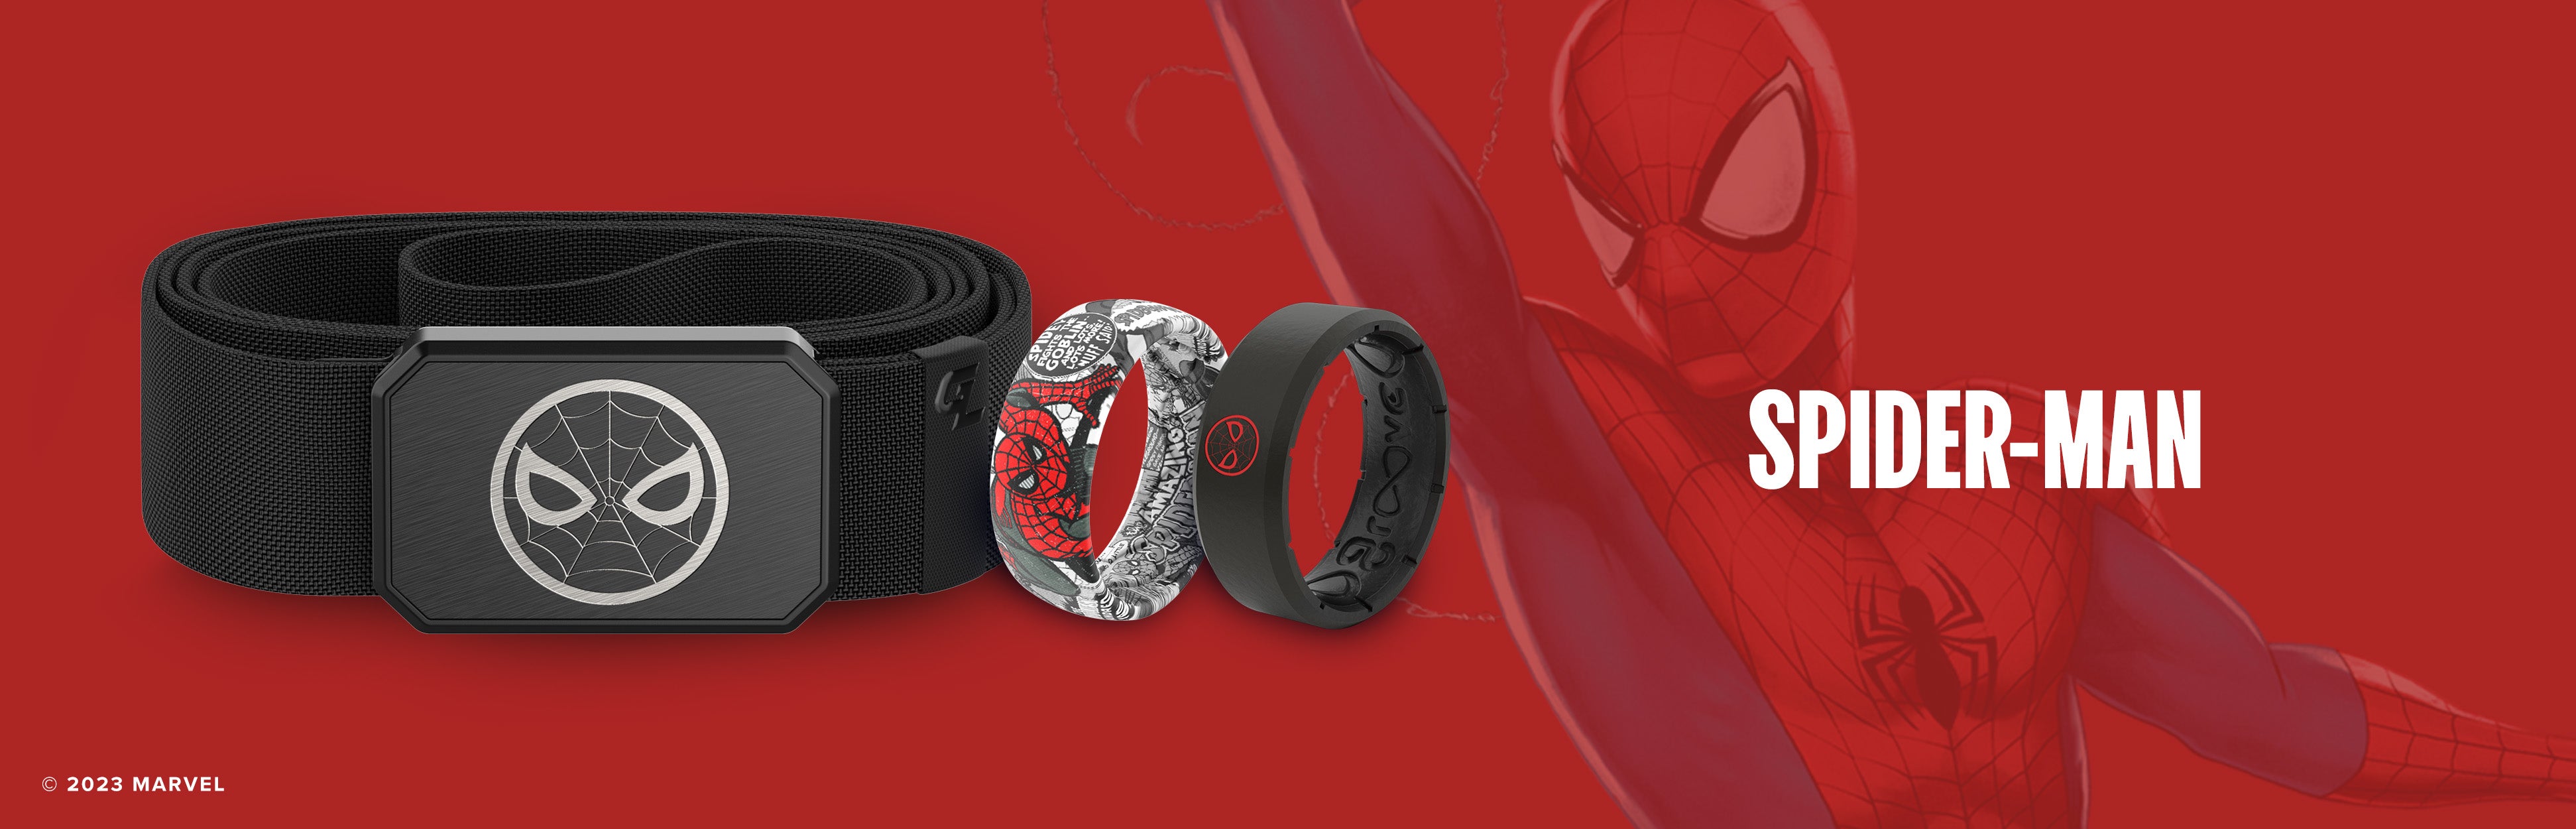 spider-man belts and rings by Groove Life